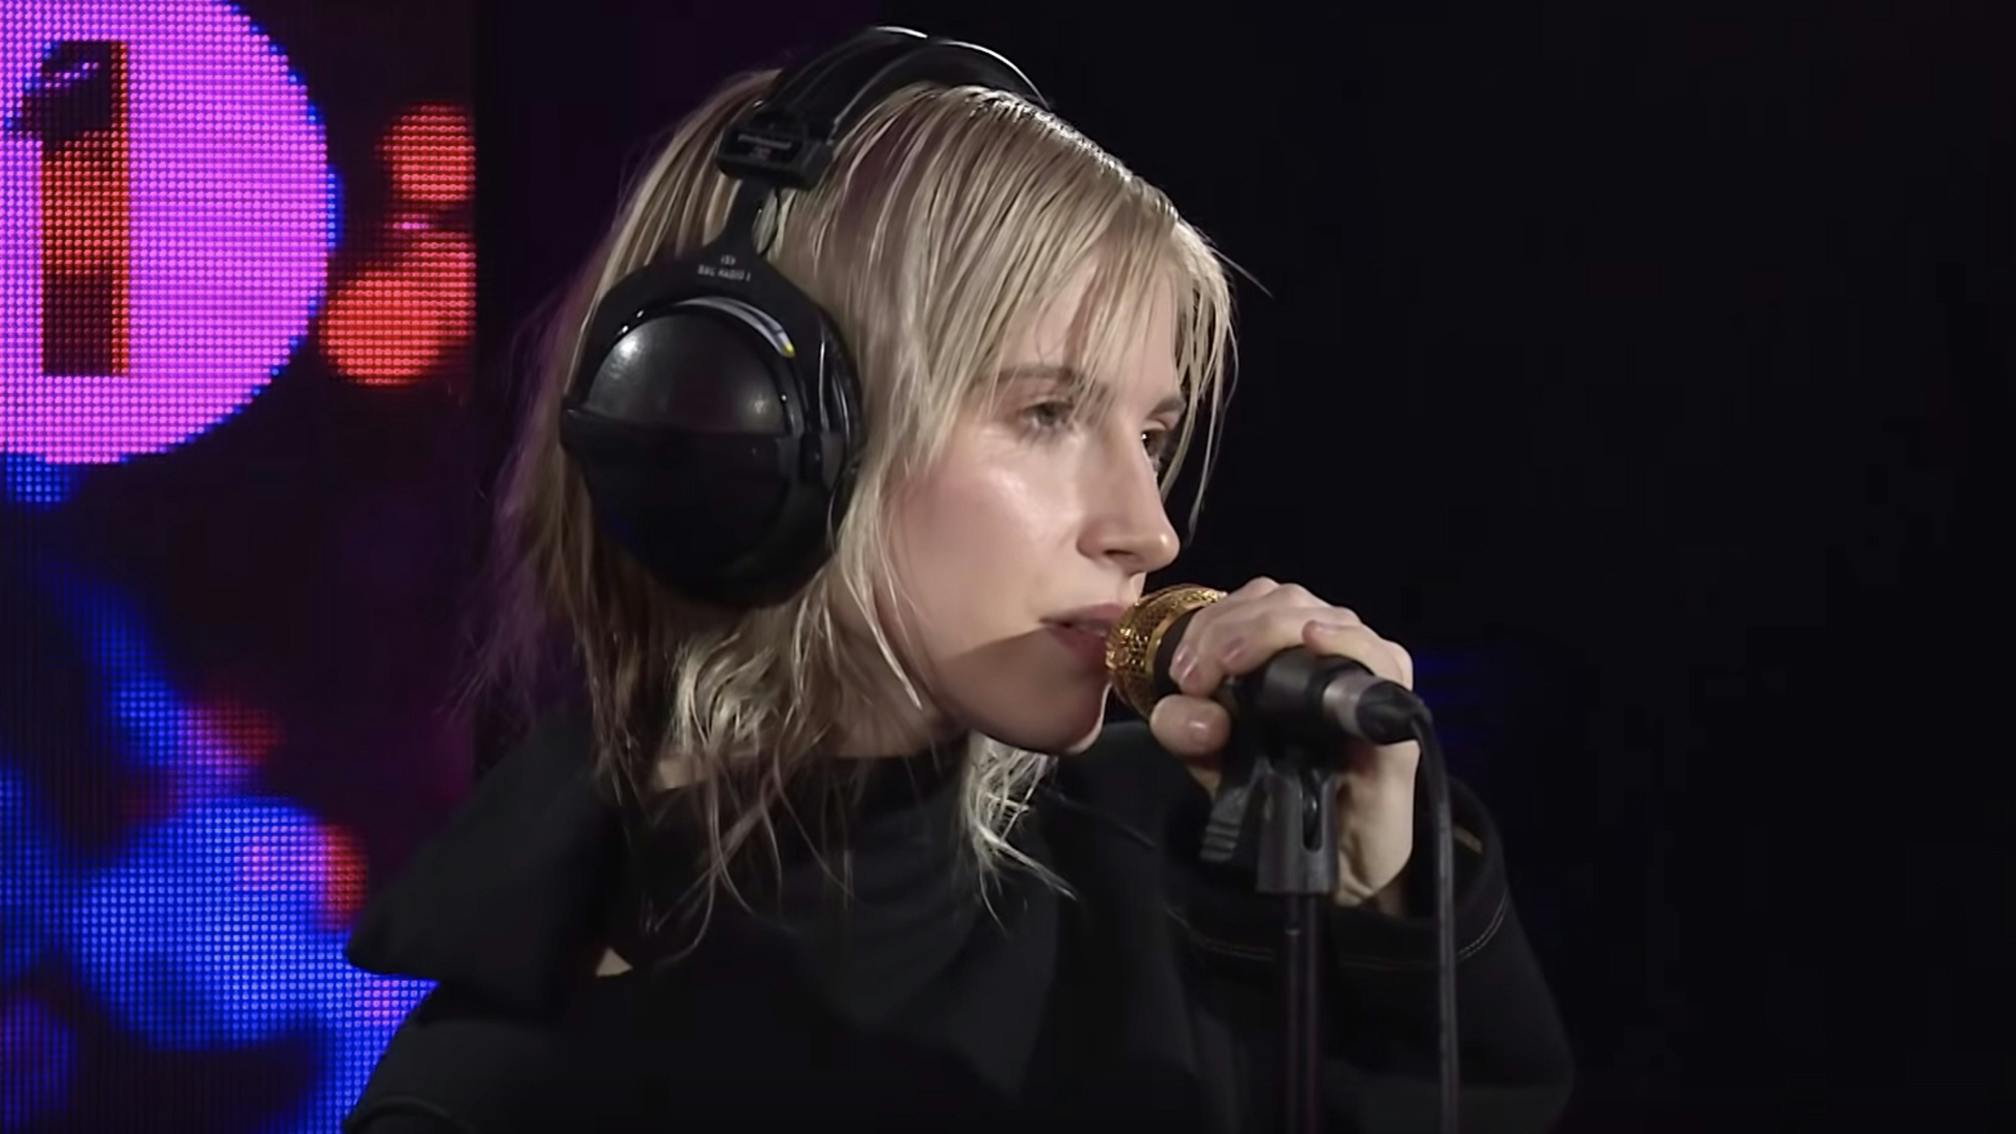 Watch Hayley Williams Cover Dua Lipa, And Perform Simmer Live For The First Time